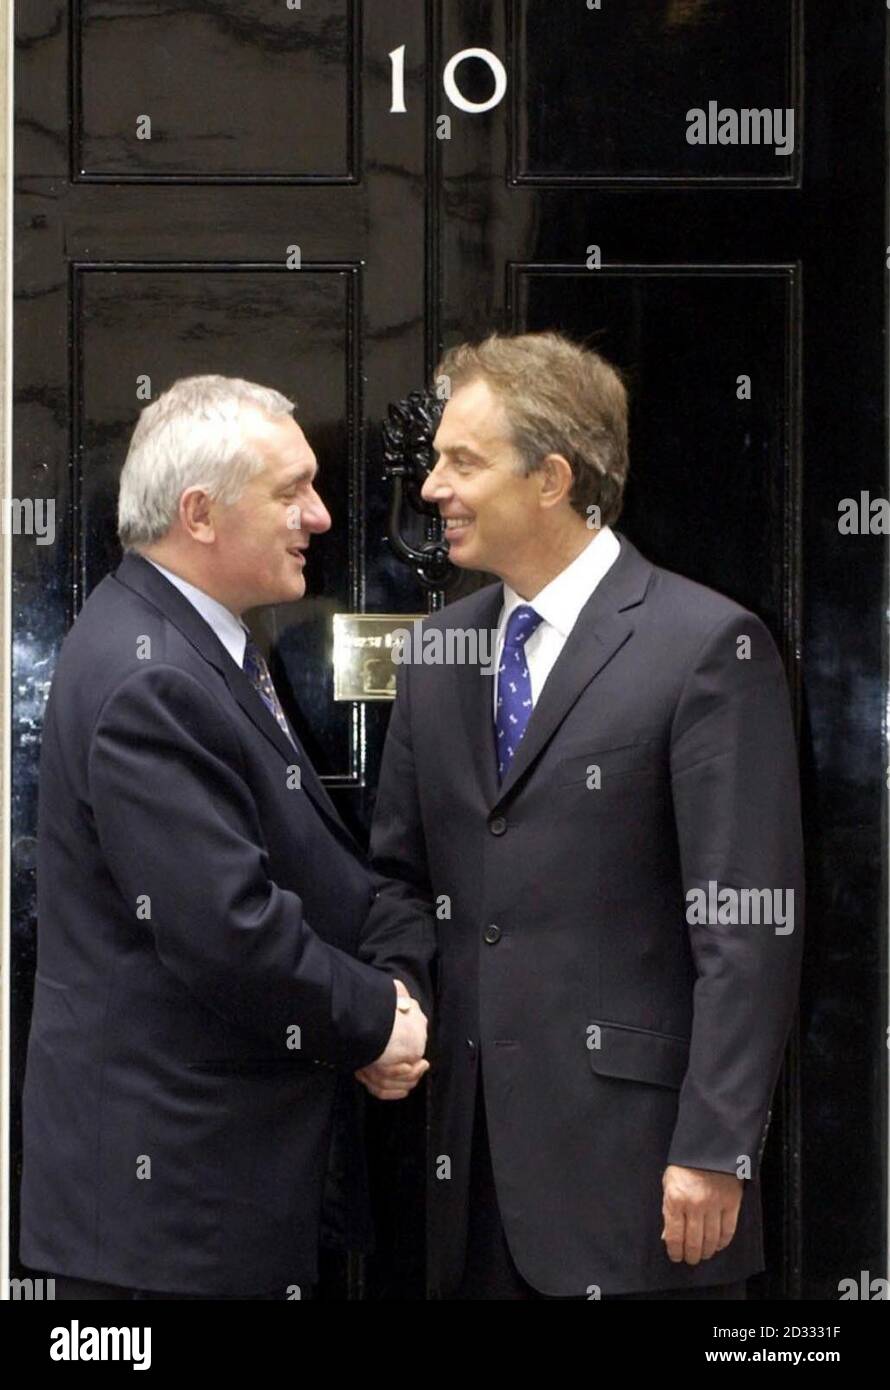 Irish Prime Minister Bertie Ahern is greeted by Prime Minister Tony Blair outside 10 Downing Street. The two premiers were having talks on a range of issues including human rights and criminal justice reforms,   * .. in a bid to inject fresh momentum into the troubled Northern Ireland peace process. Stock Photo